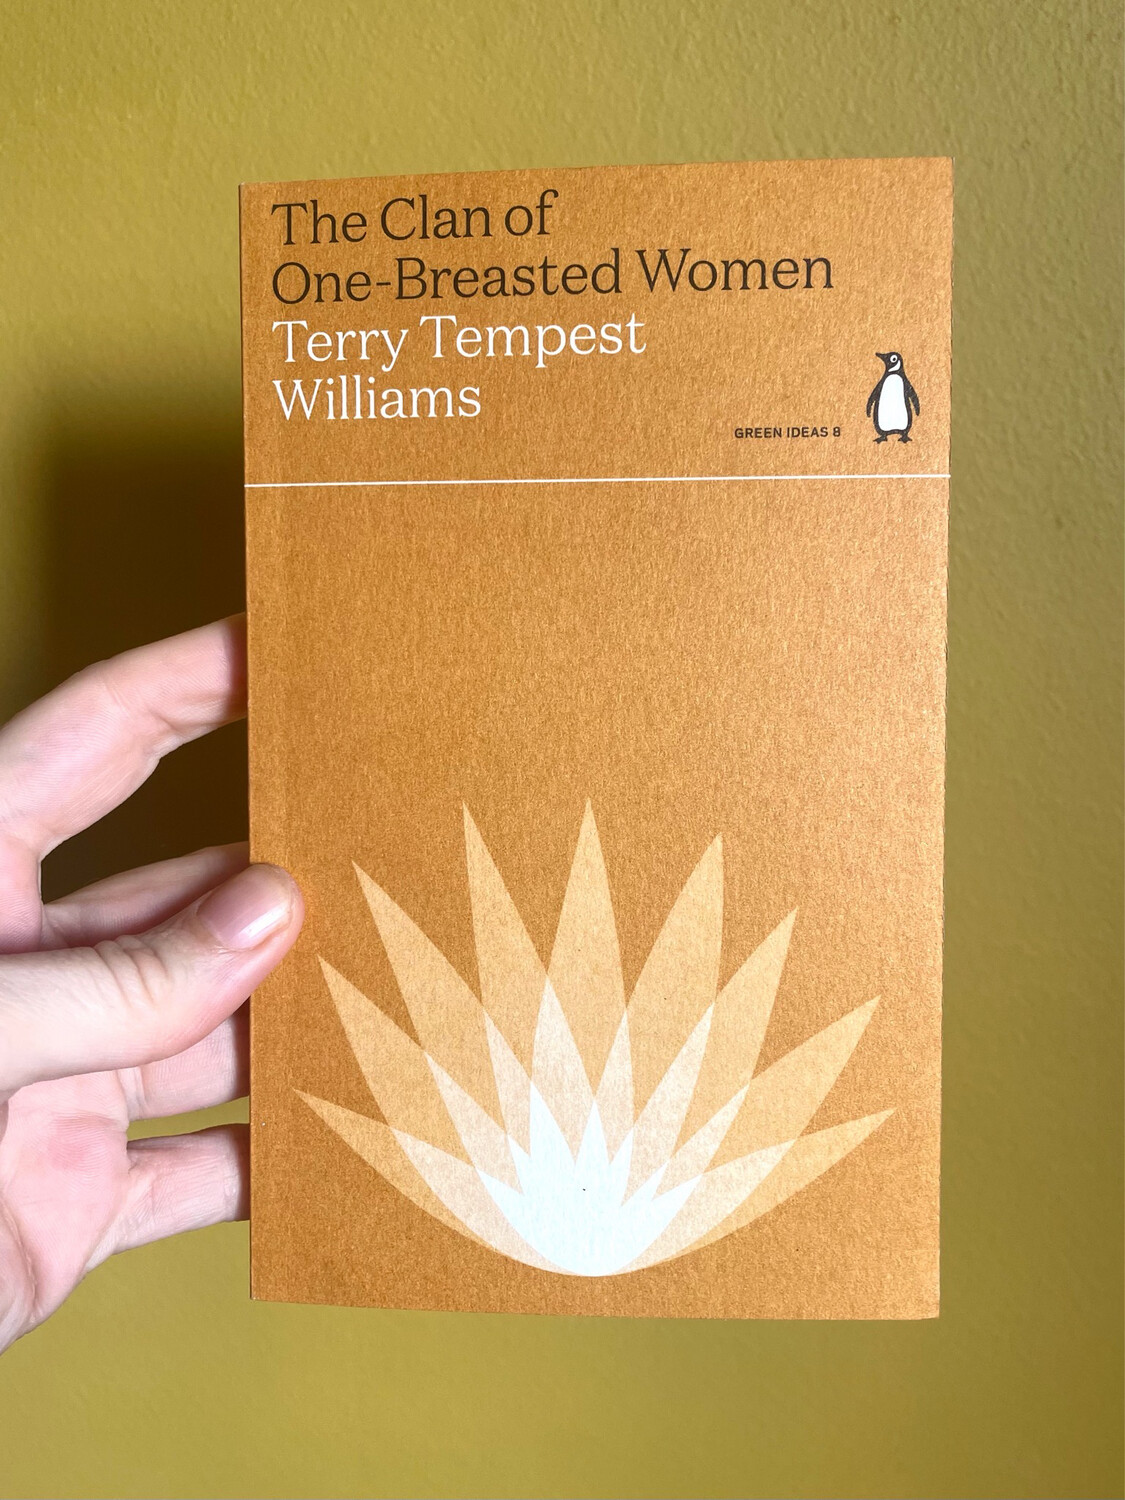 The Clan Of One-Breasted Women By Terry Tempest Williams